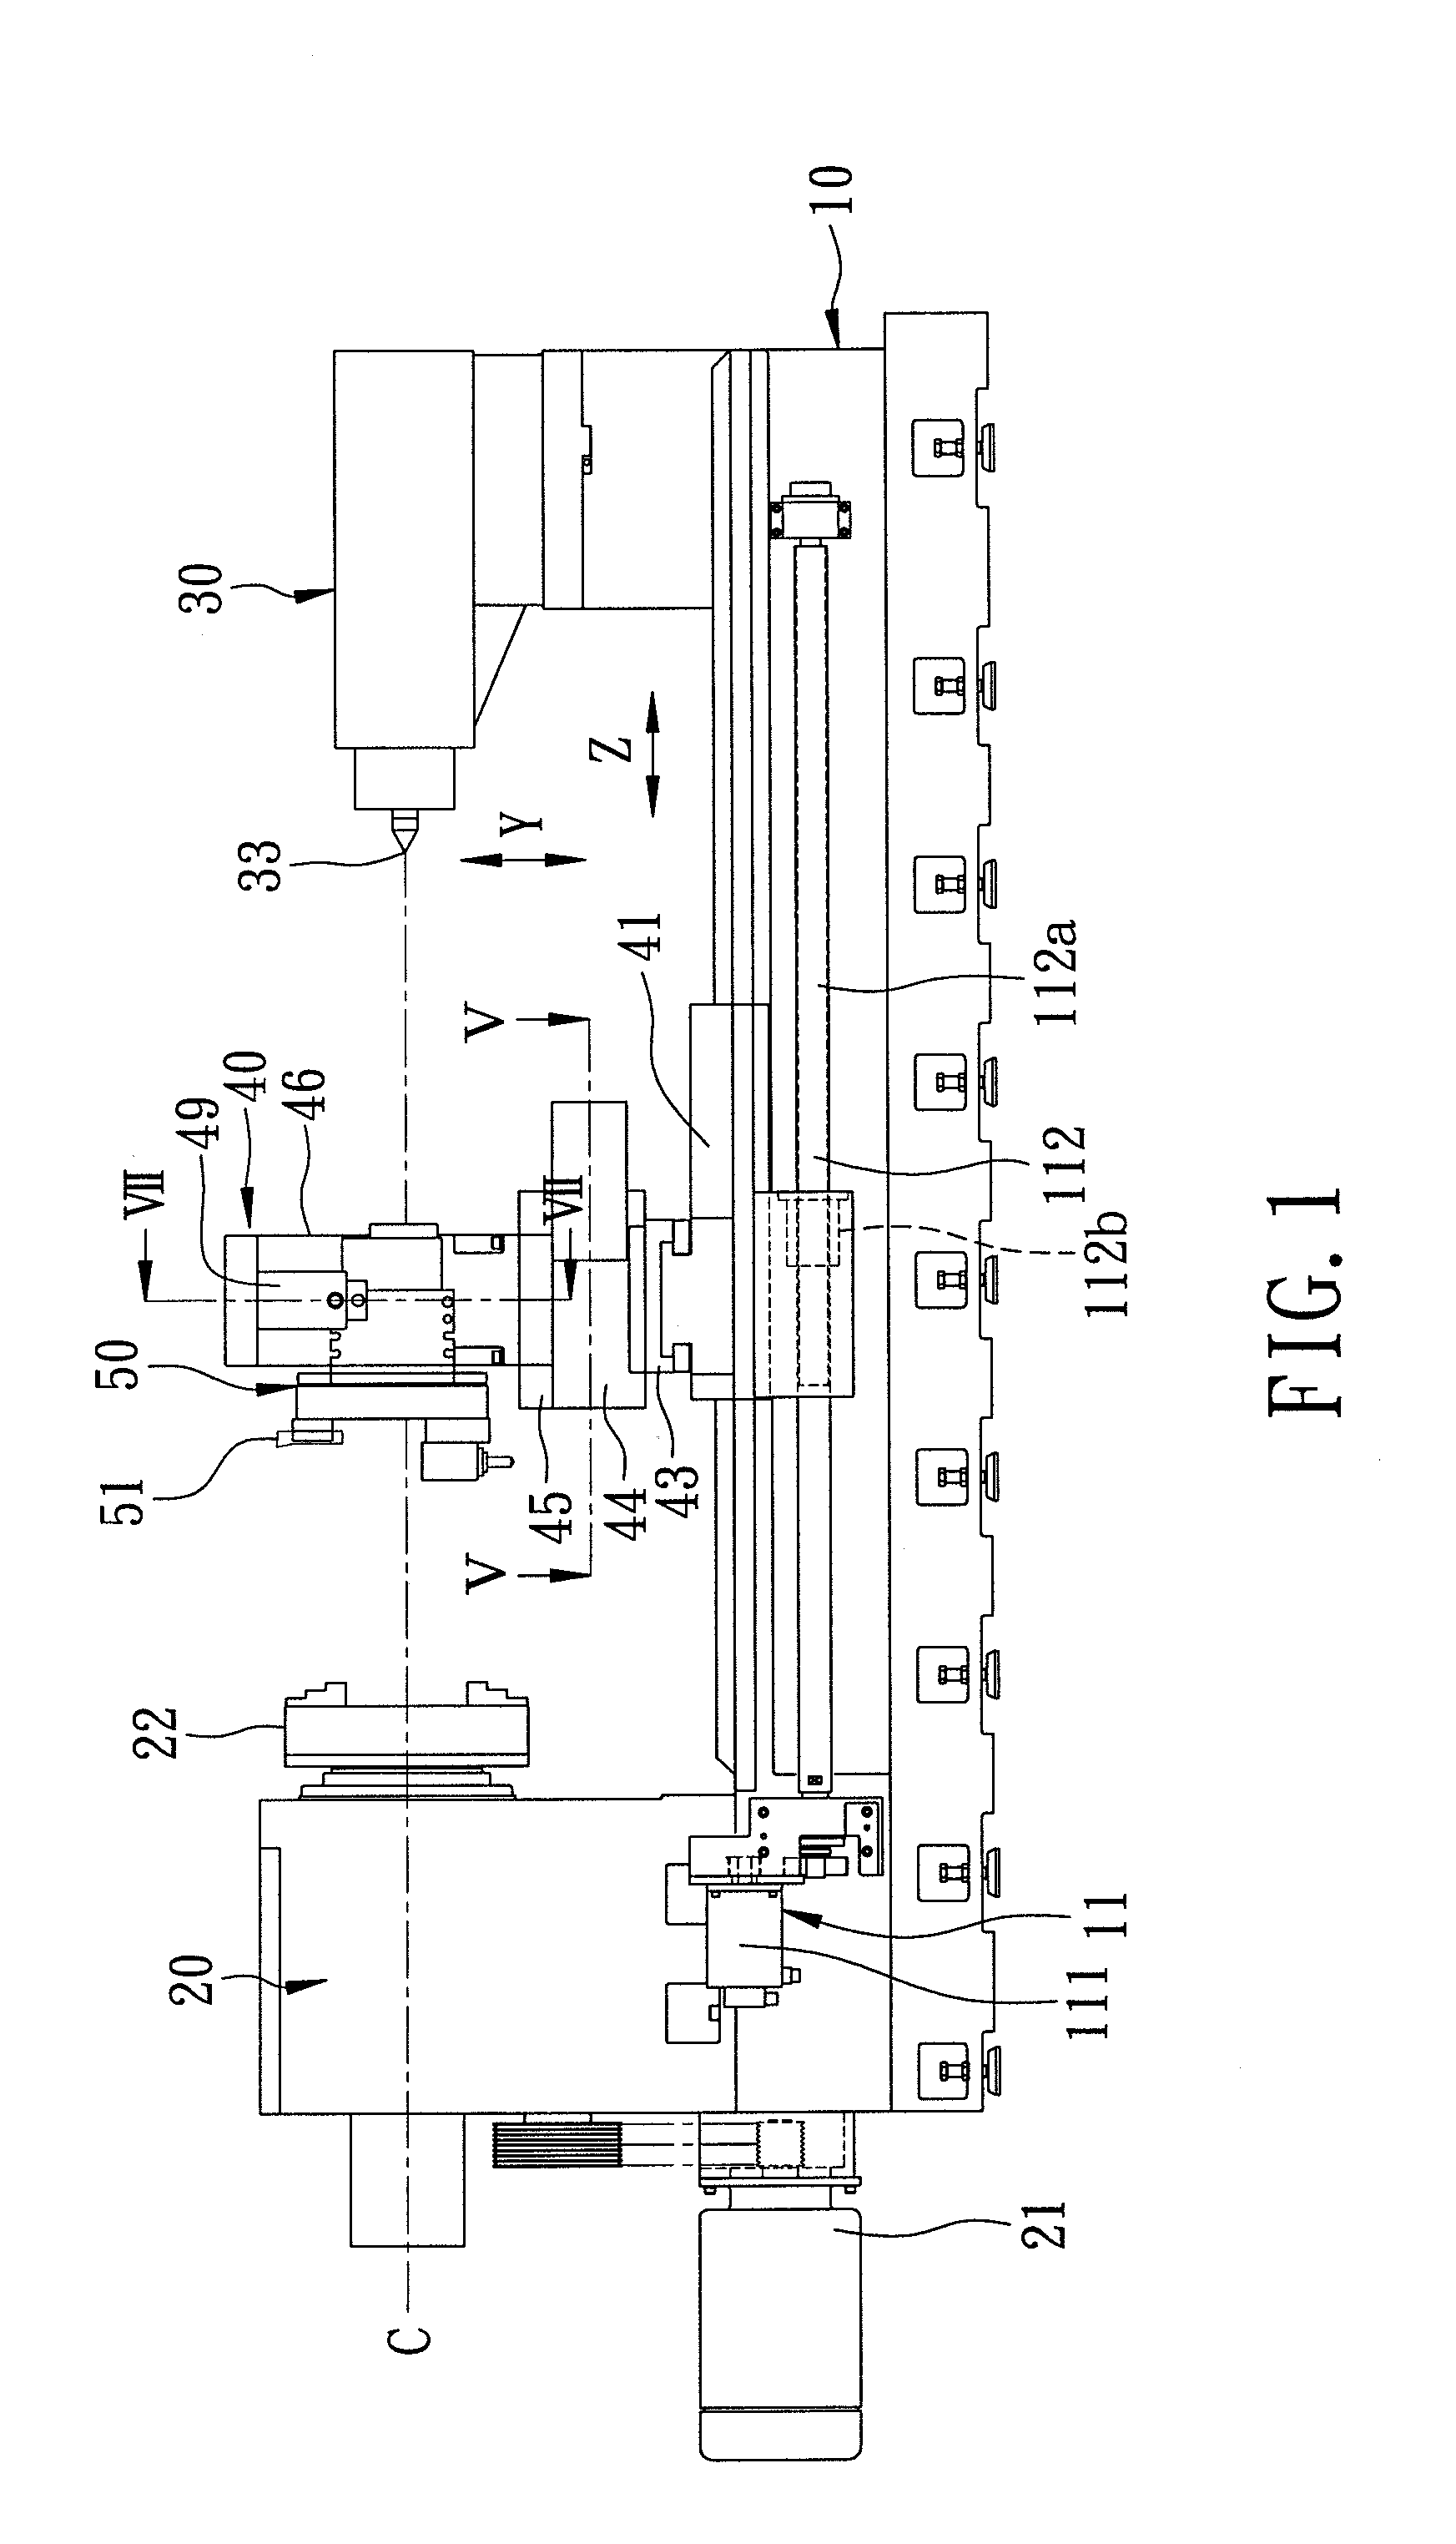 Tool holding device for a five-axis lathe